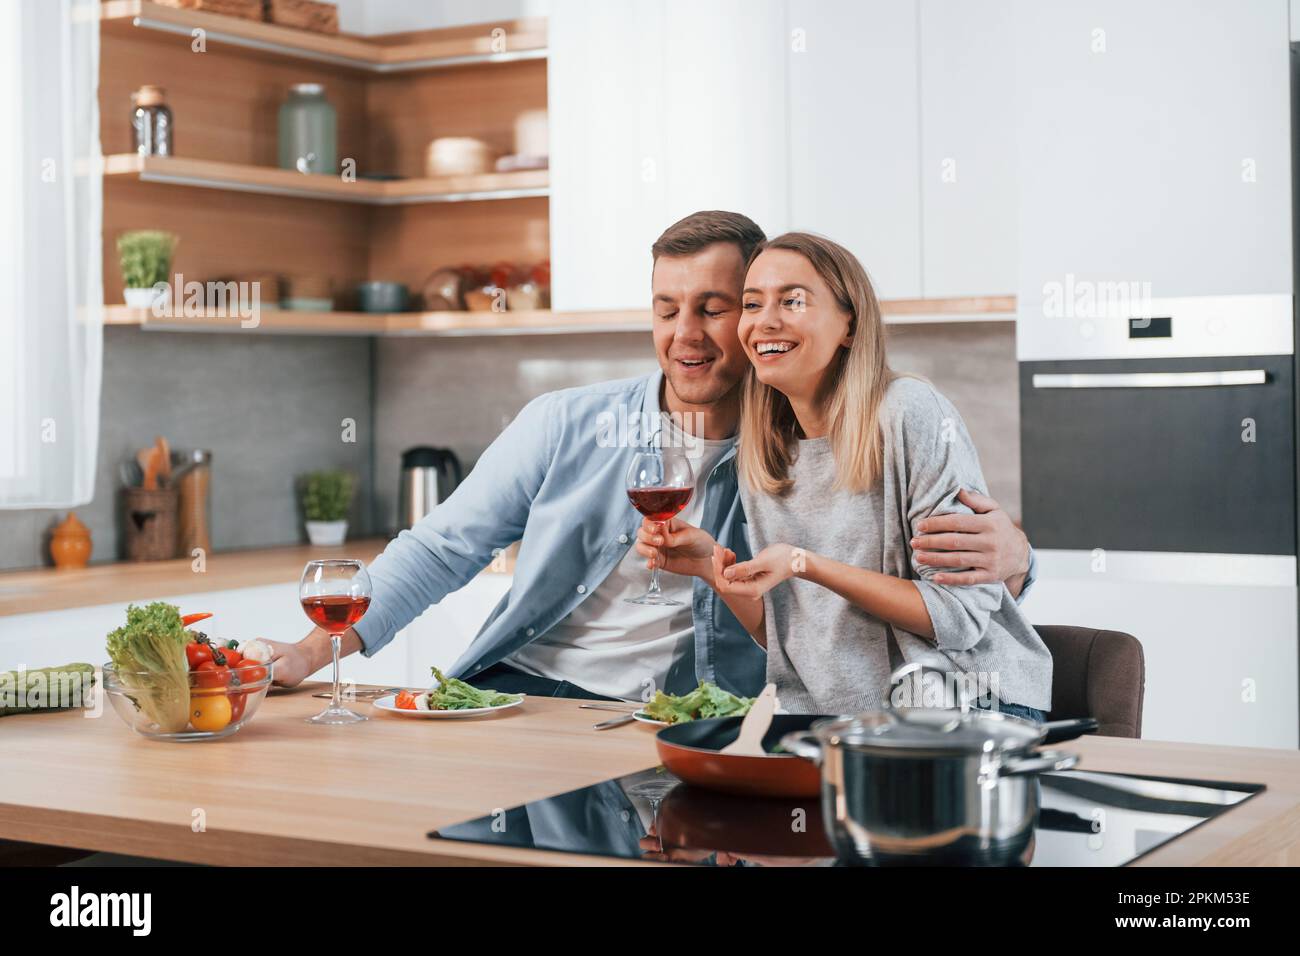 Having weekend together. Couple preparing food at home on the modern kitchen. Stock Photo